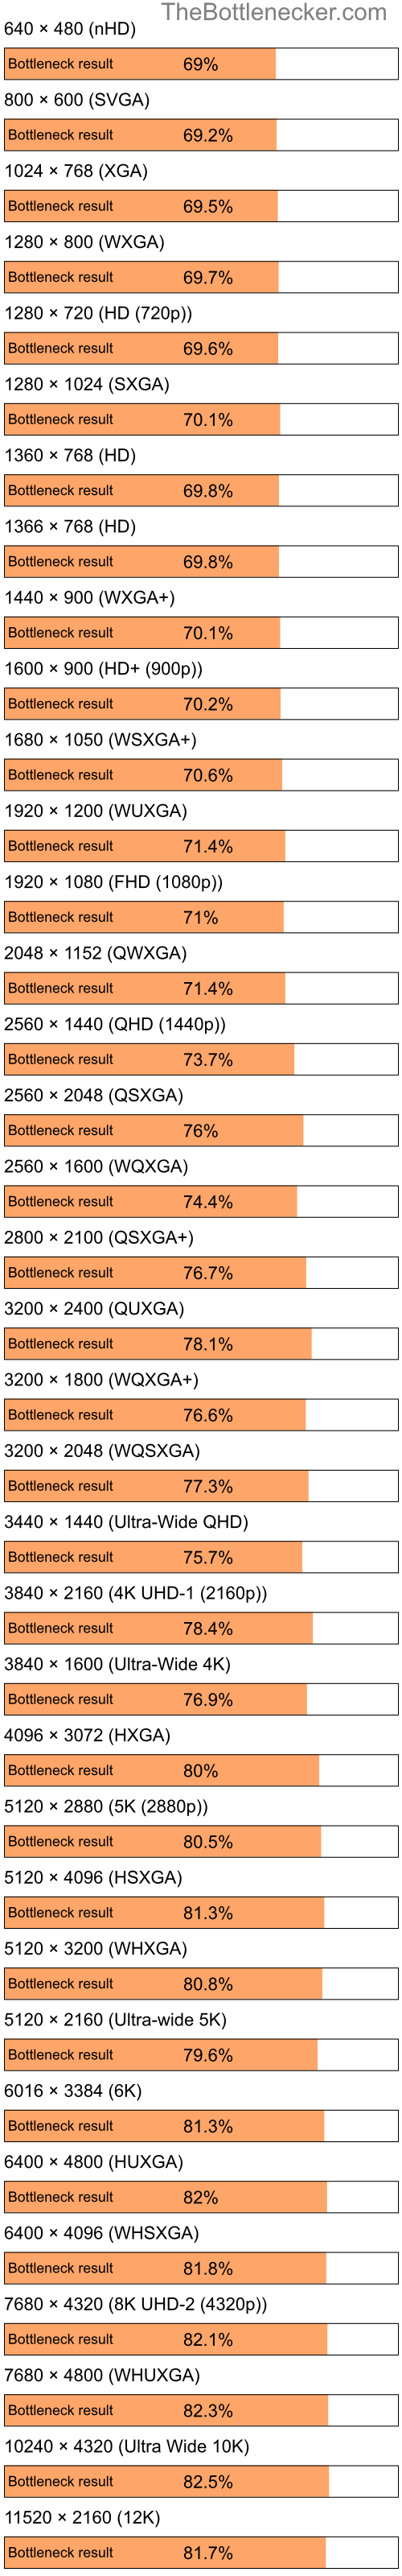 Bottleneck results by resolution for Intel Celeron and NVIDIA Quadro FX 4400 in Graphic Card Intense Tasks